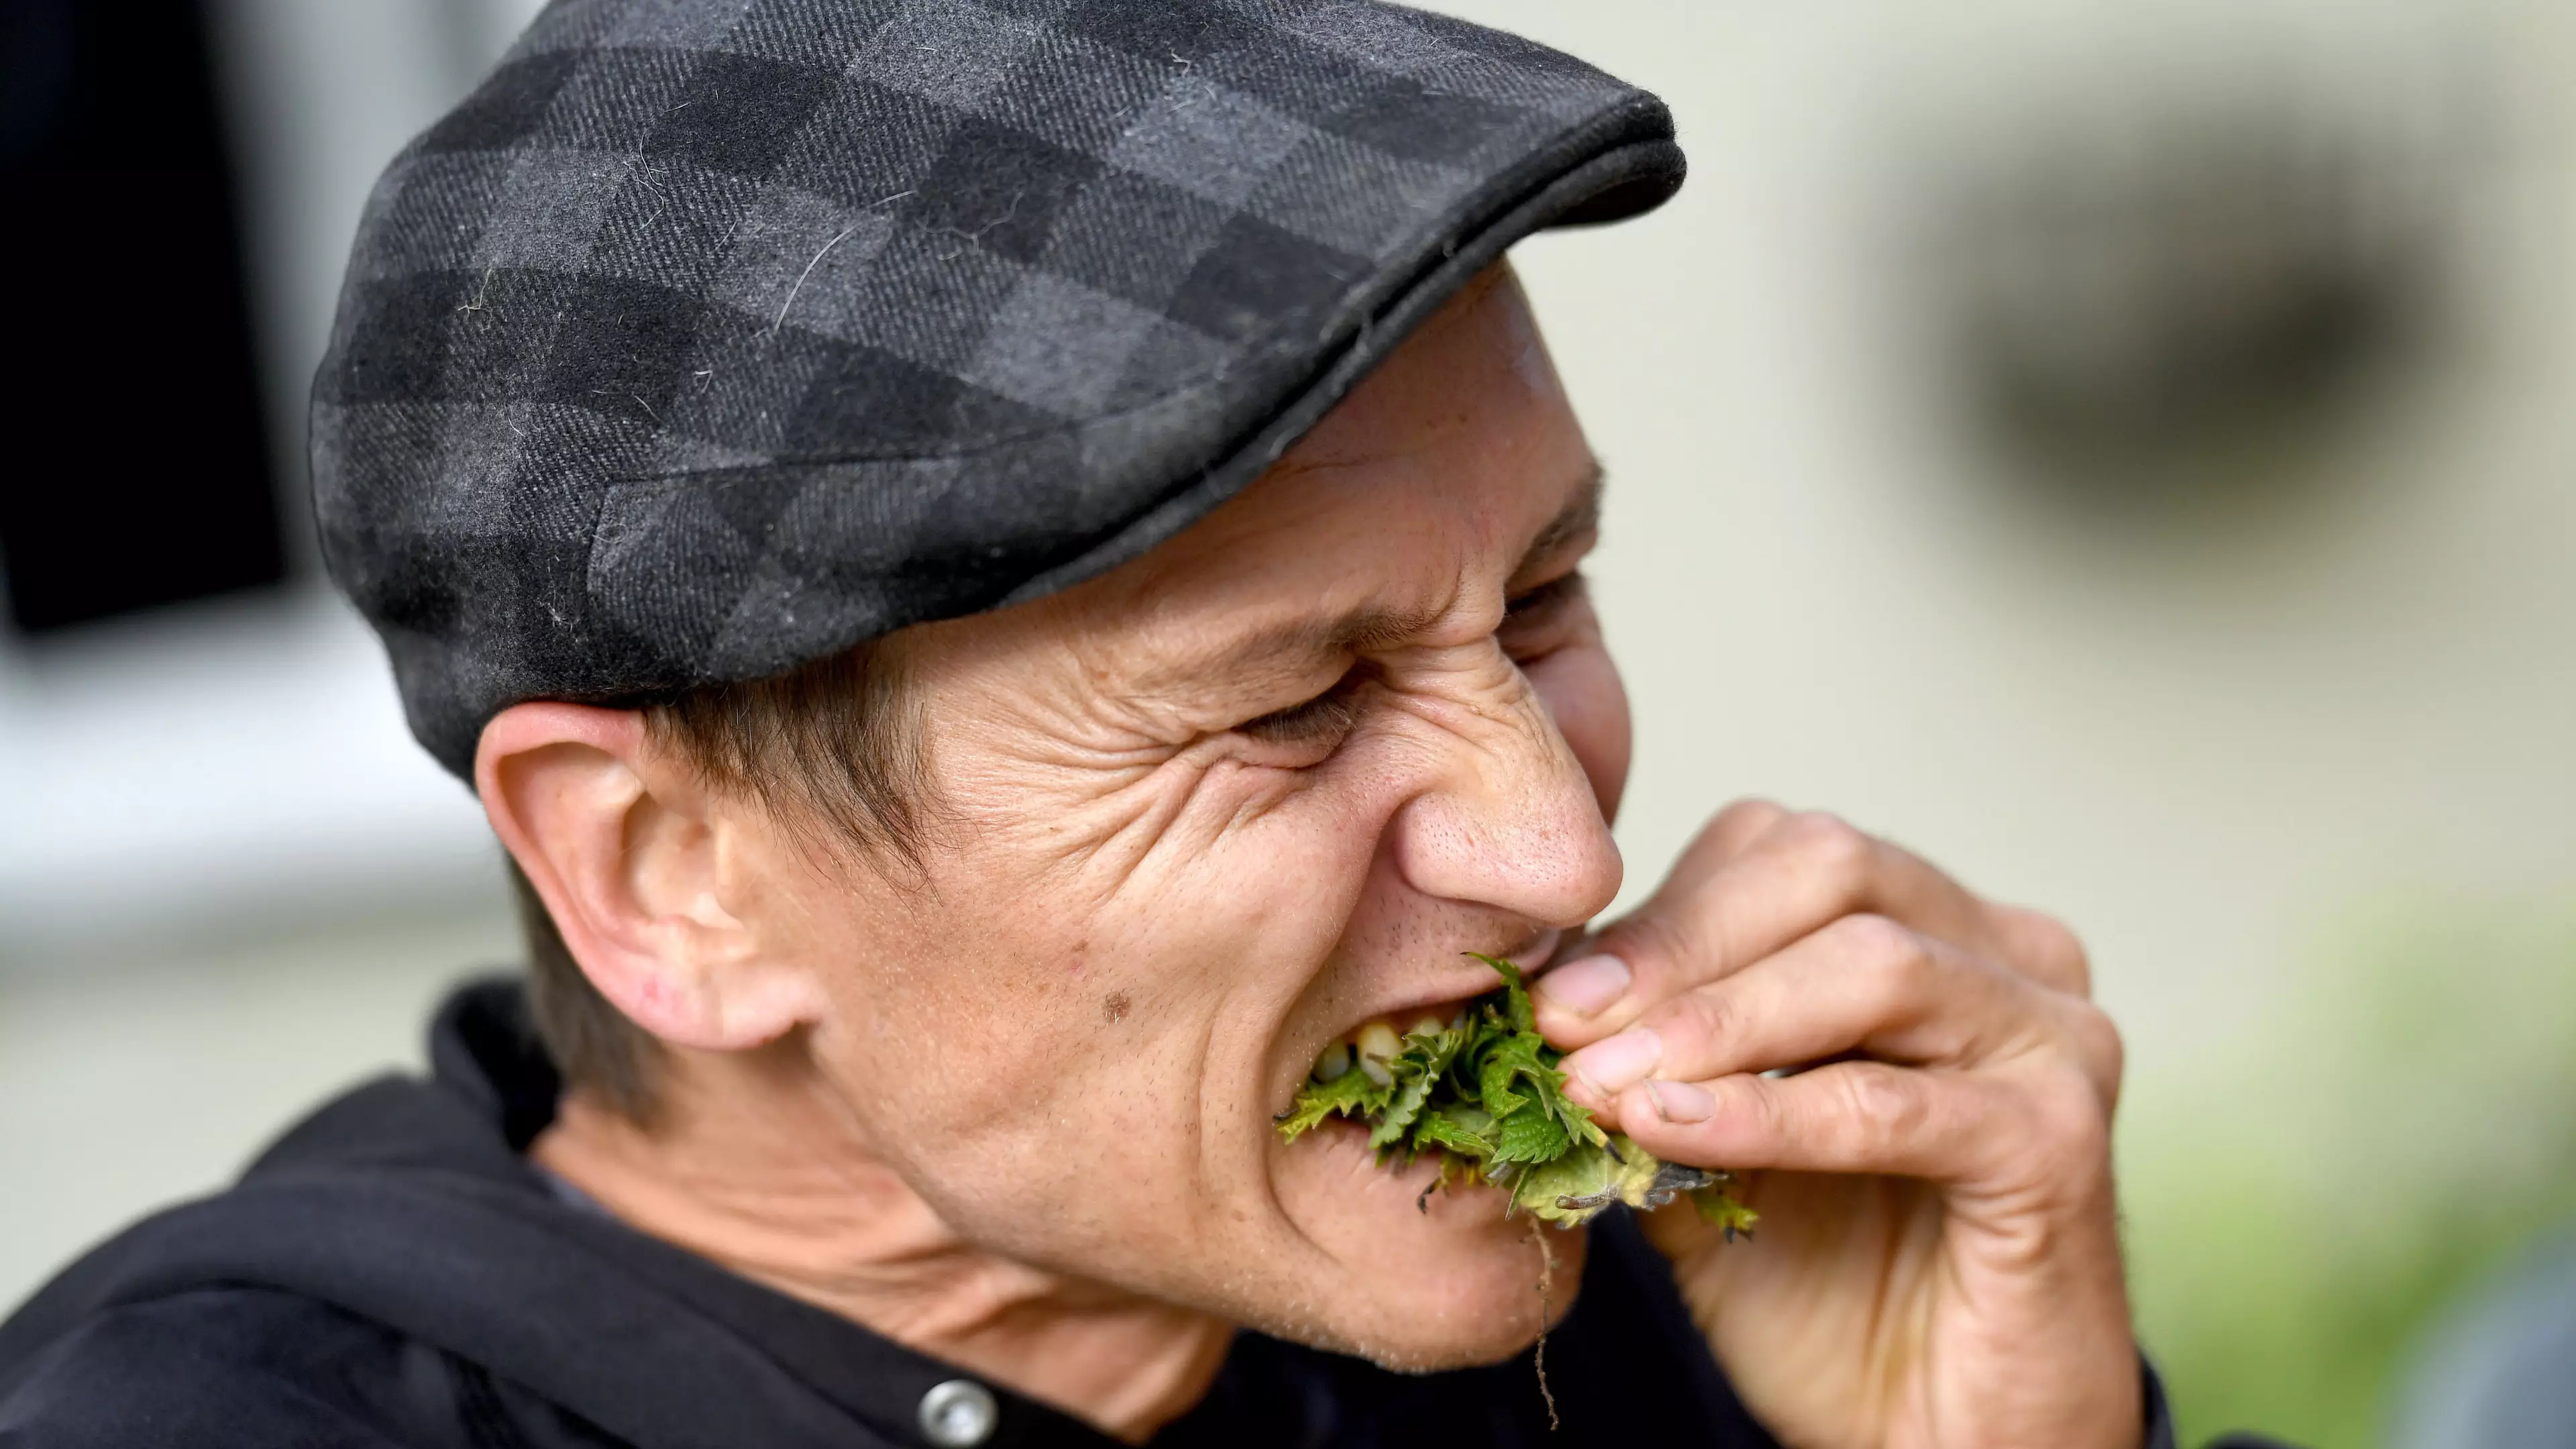 Man Claims World Record By Eating 54ft Of Stinging Nettles